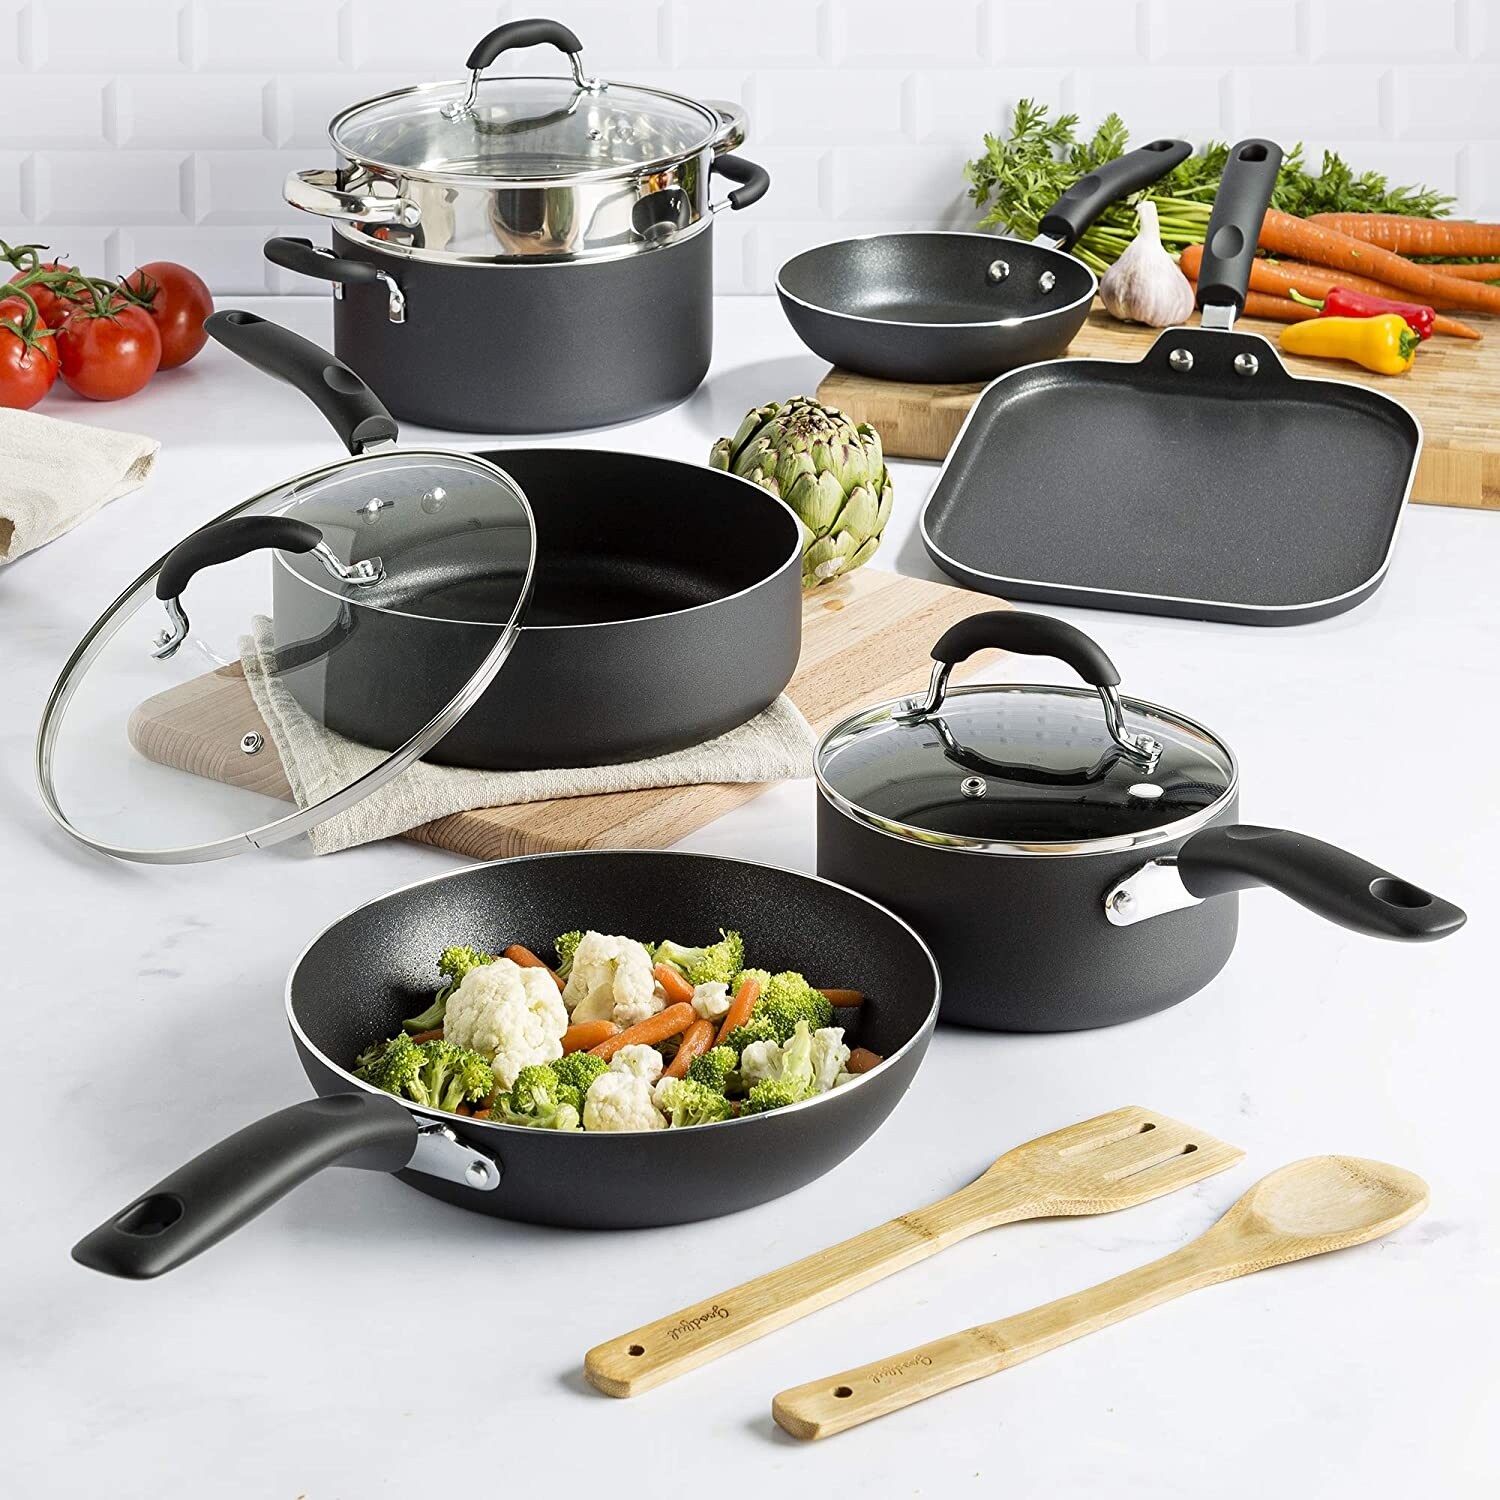 https://ak1.ostkcdn.com/images/products/is/images/direct/85362c27bd562dbee746b1833cce3a86dc1a0287/Goodful-Cookware-Set-with-Premium-Non-Stick-Coating%2C%C2%A0-Tempered-Glass-Steam-Vented-Lids%2C-Stainless-Steel-Steamer.jpg